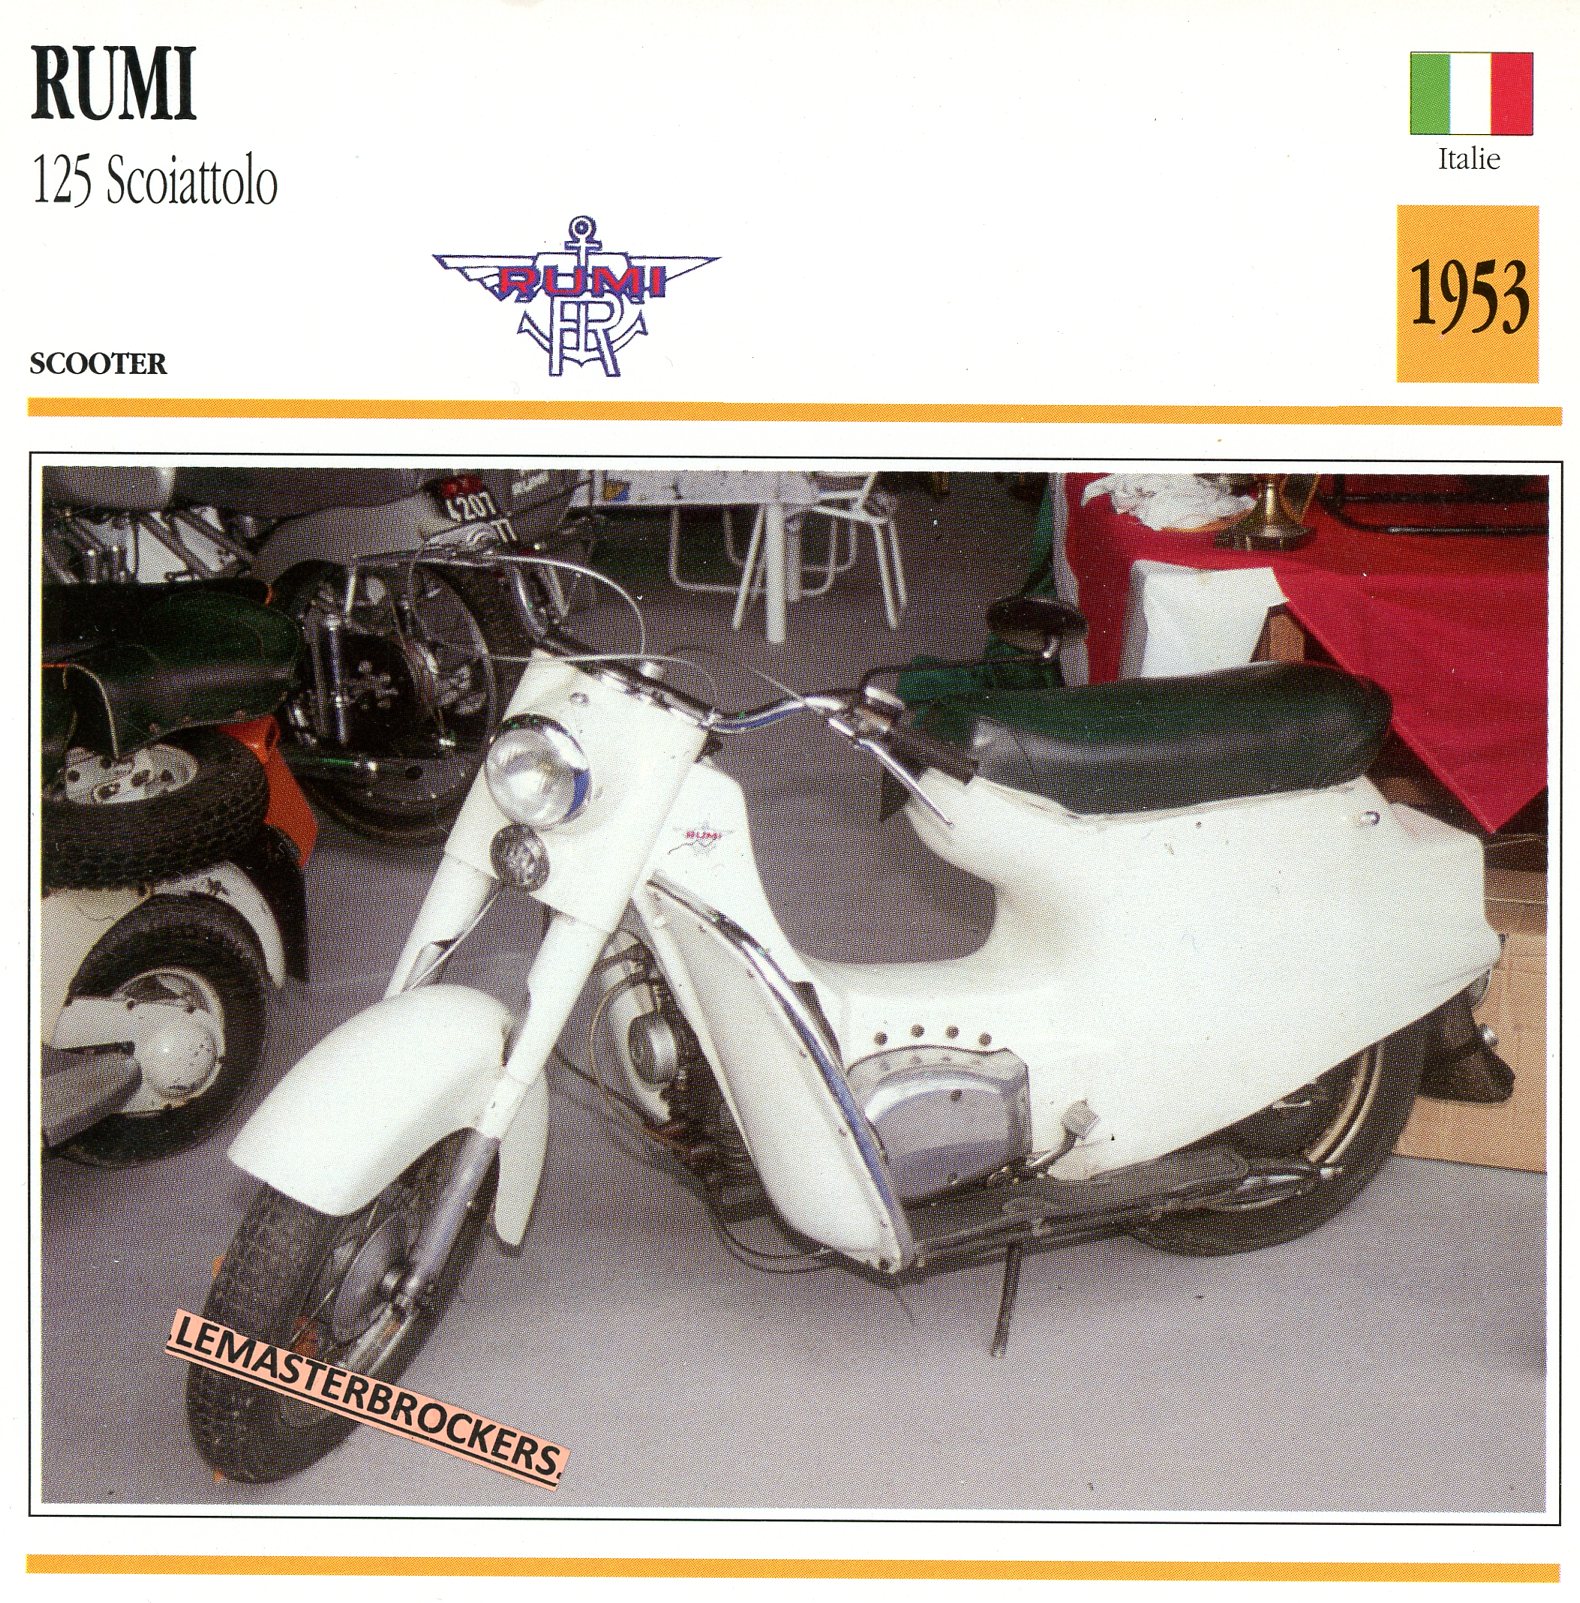 RUMI-125-SCOIATTOLO-1953-FICHE-SCOOTER-LEMASTERBROCKERS-CARD-MOTORCYCLE